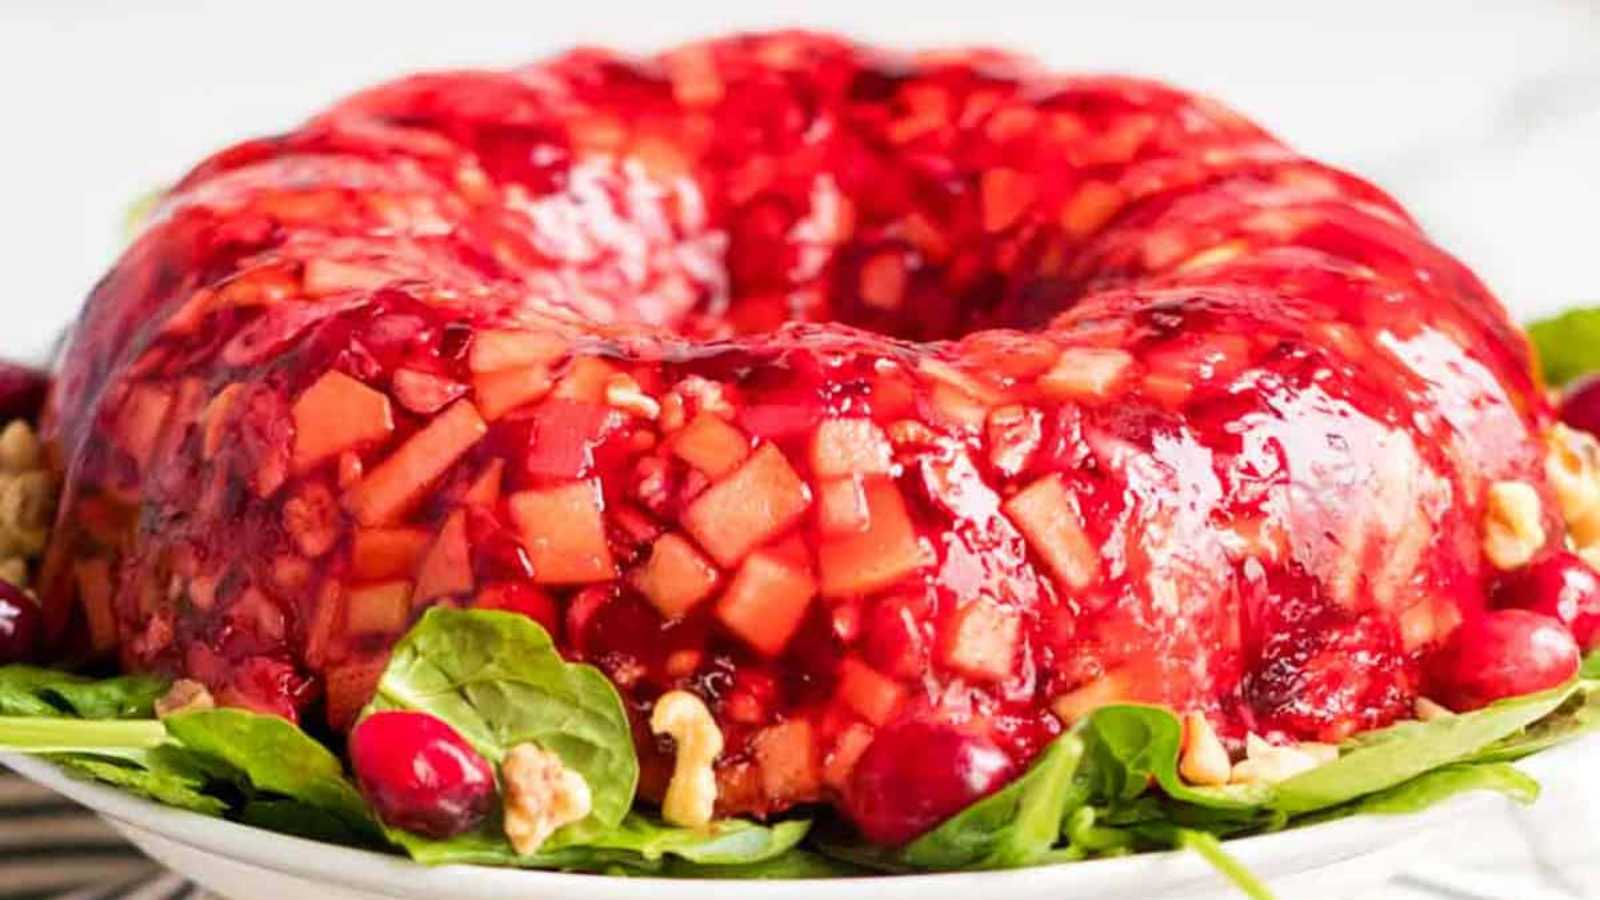 A red cranberry jello salad with fresh fruit in a bundy-type mold on a platter for serving.